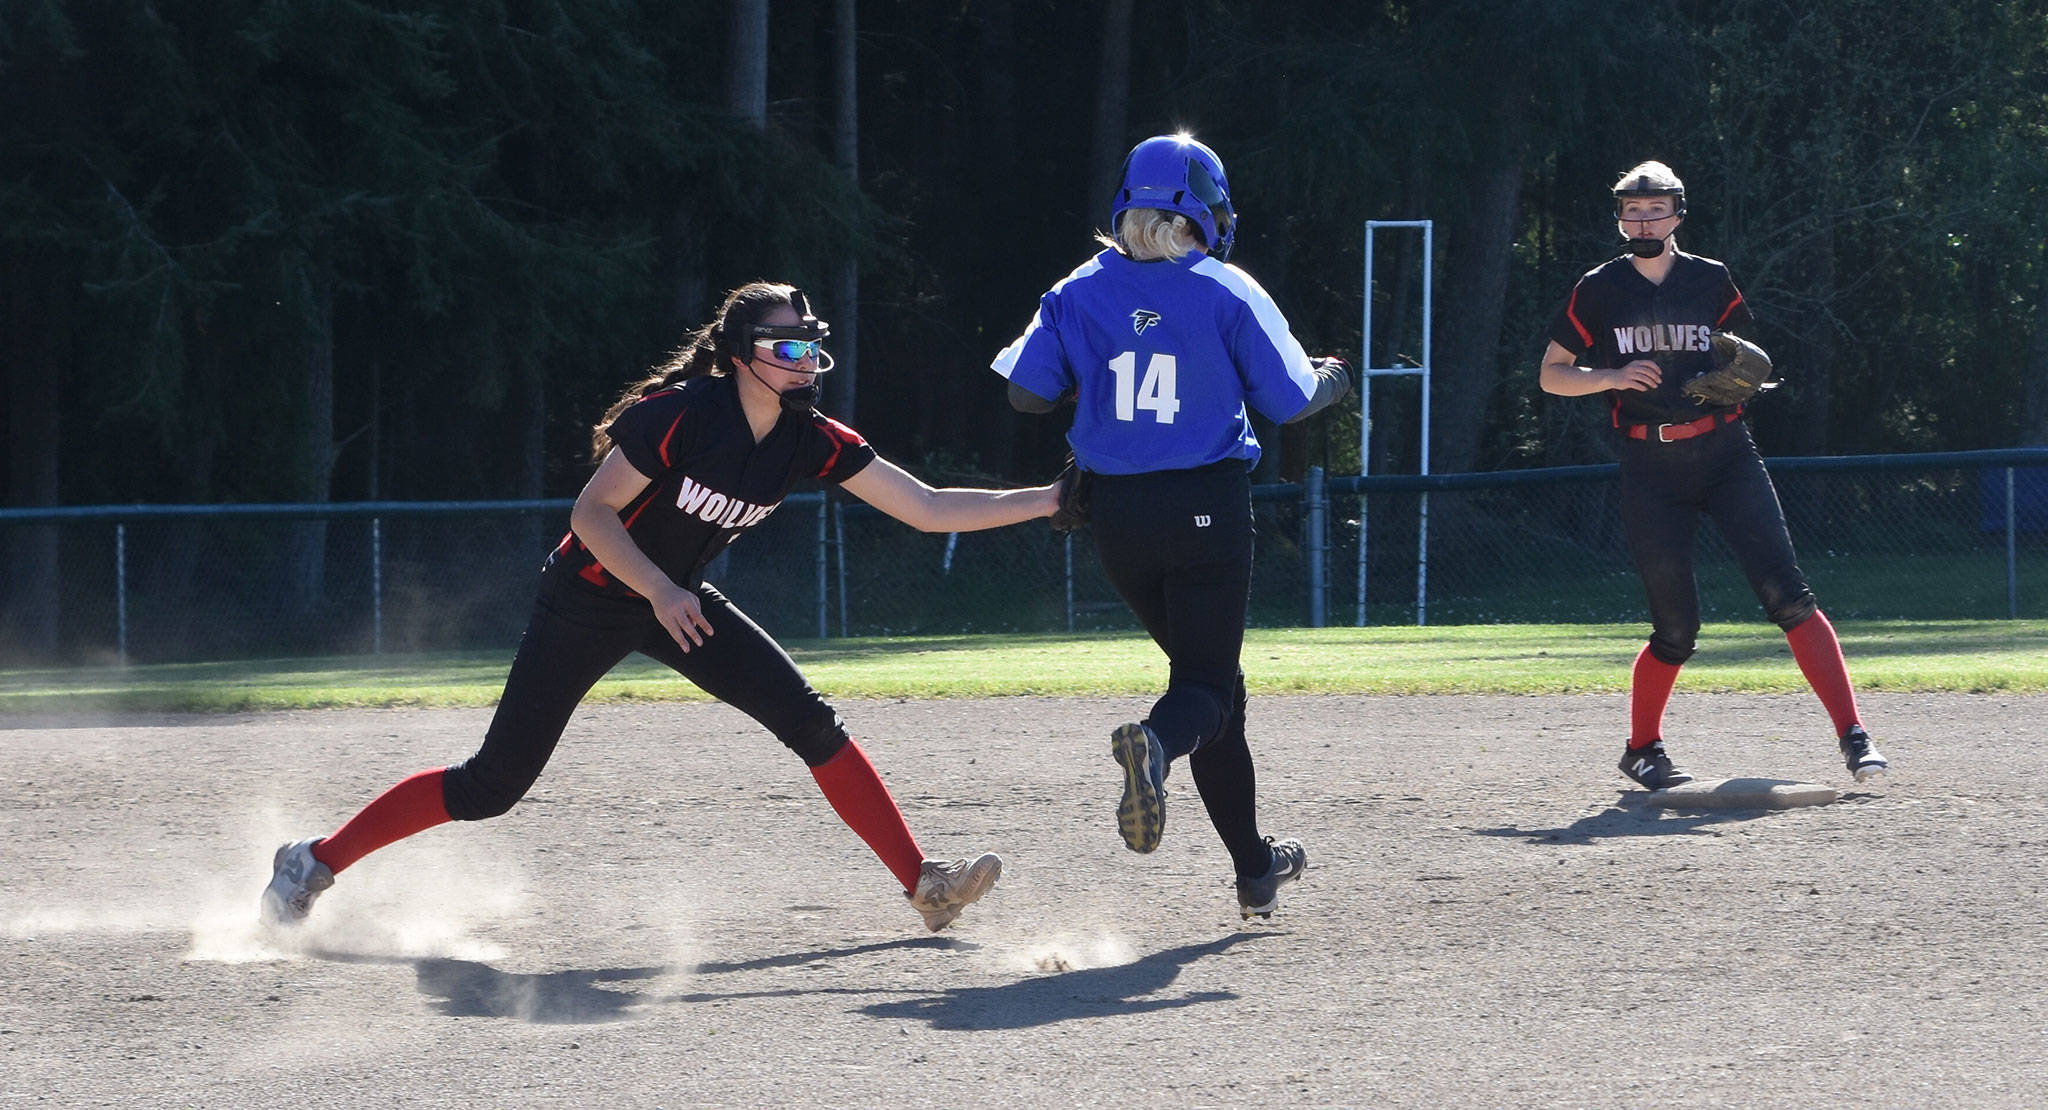 Coupeville second baseman Scout Smith tags out South Whidbey’s Makenna Morley as shortstop Chelsea Prescott looks on.(Photo by Karen Carlson)